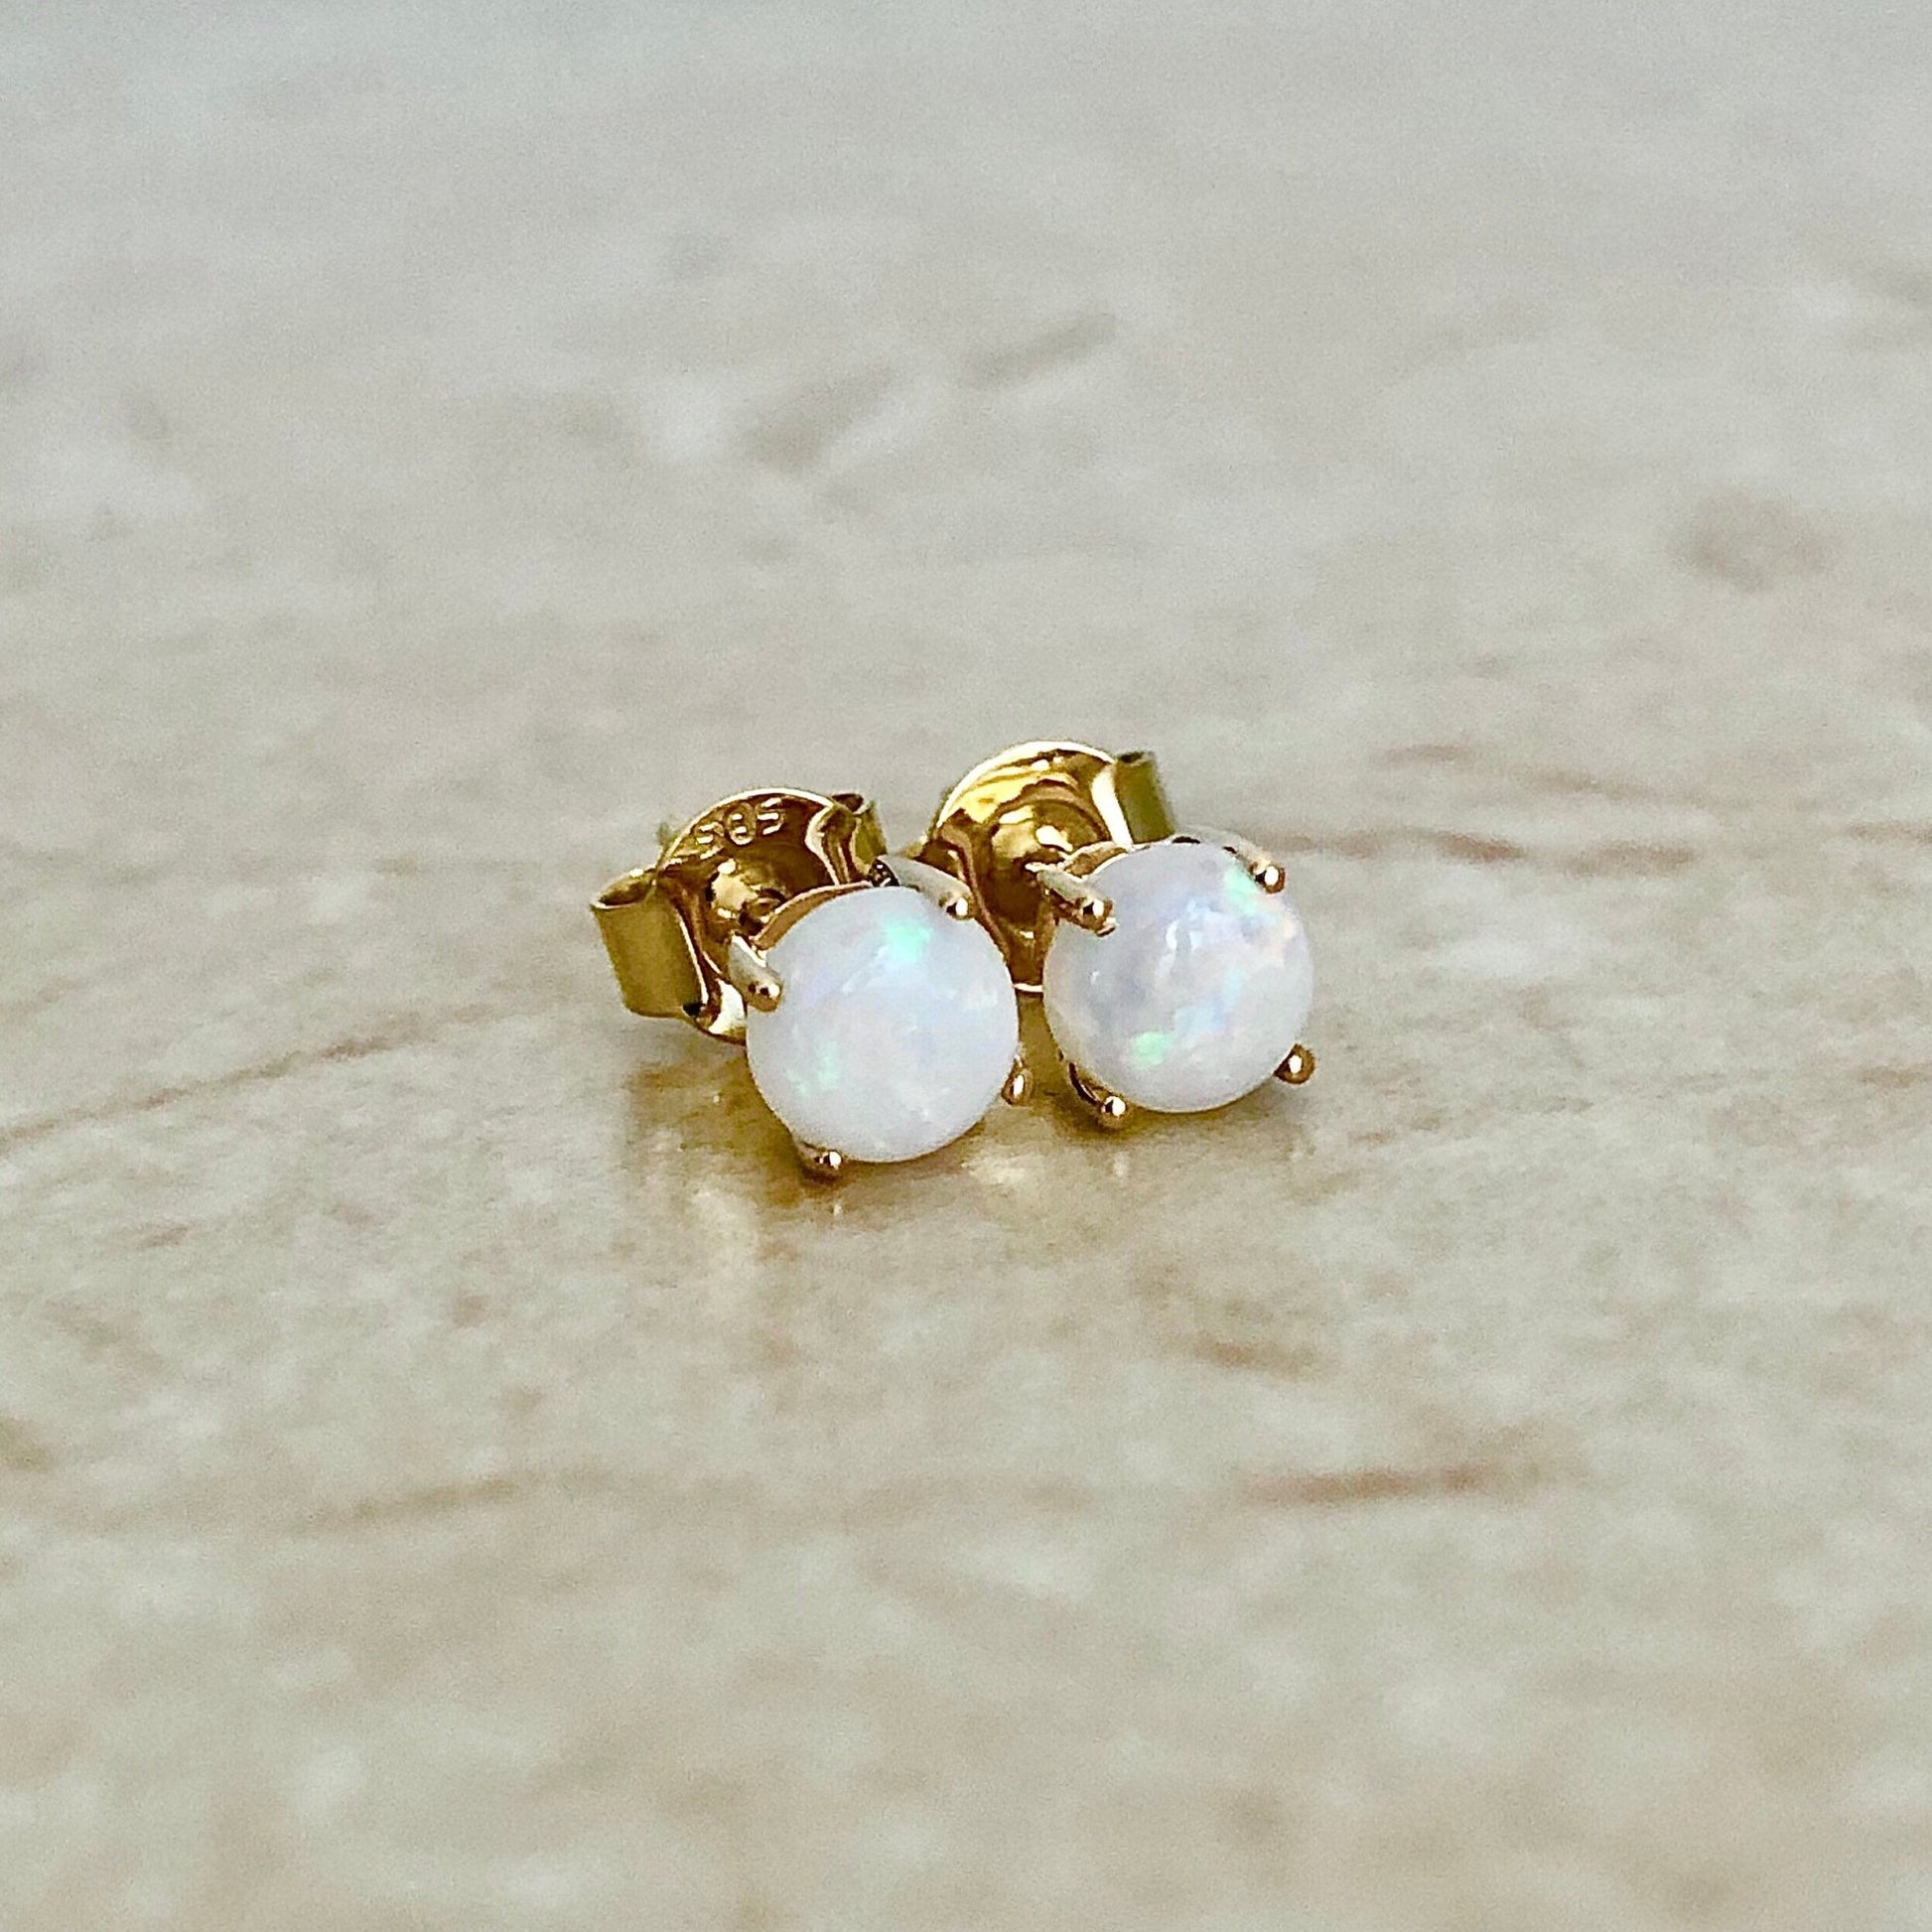 14K Round Opal Stud Earrings - Yellow Gold Opal Studs - Gold Opal Earrings -Genuine Opal-Round Opal Earrings-October Birthstone Gift For Her